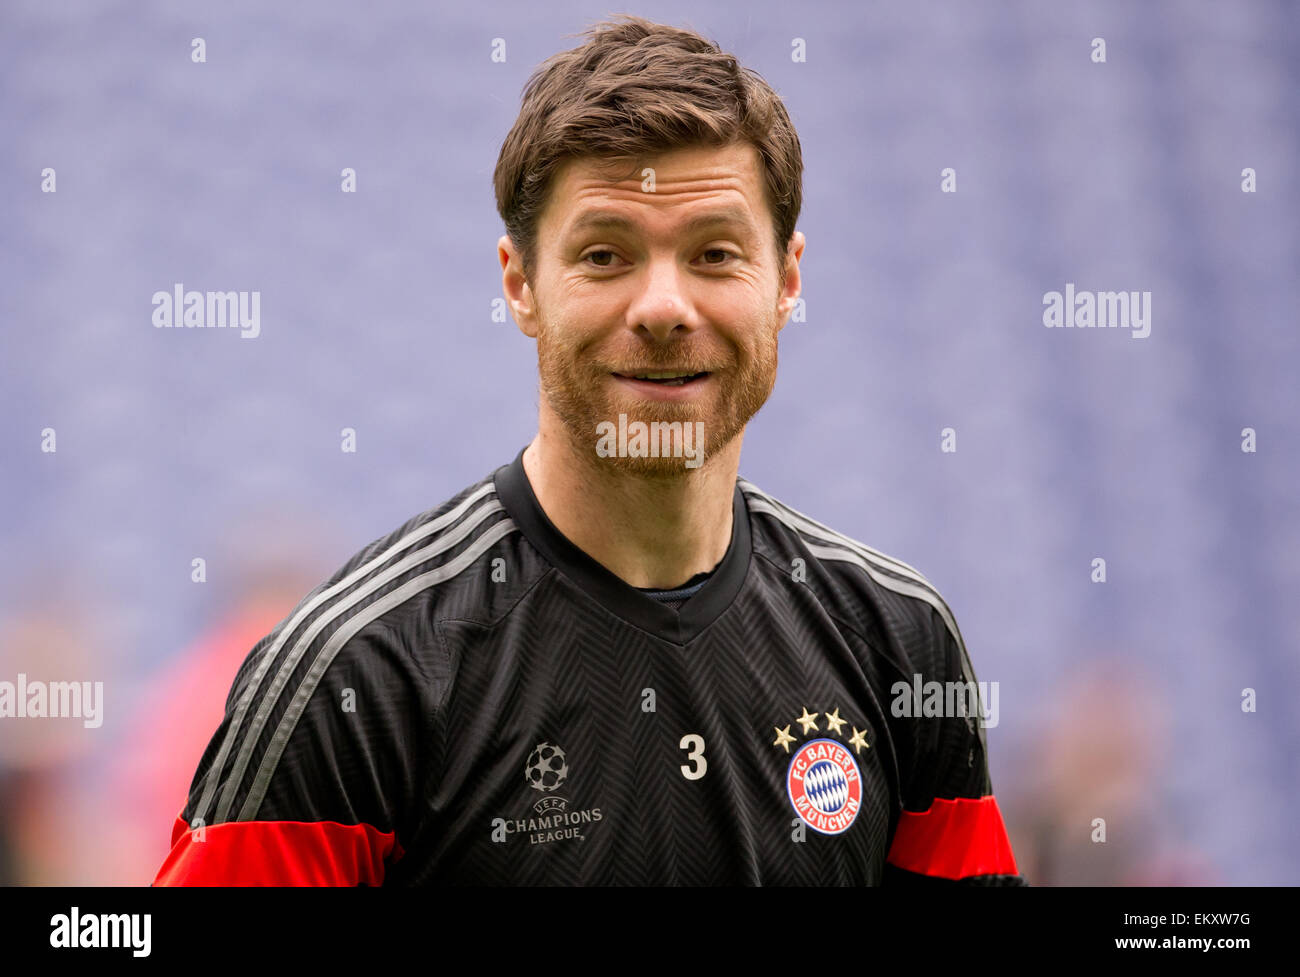 Porto, Portugal. 14th Apr, 2015. FC Bayern Munich's Xabi Alonso in action during a training session at Estadio do Dragao in Porto, Portugal, 14 April 2015. Bayern Munich will face FC Porto in the UEFA Champions League quarter final first leg soccer match April 15. Photo: Sven Hoppe/dpa/Alamy Live News Stock Photo